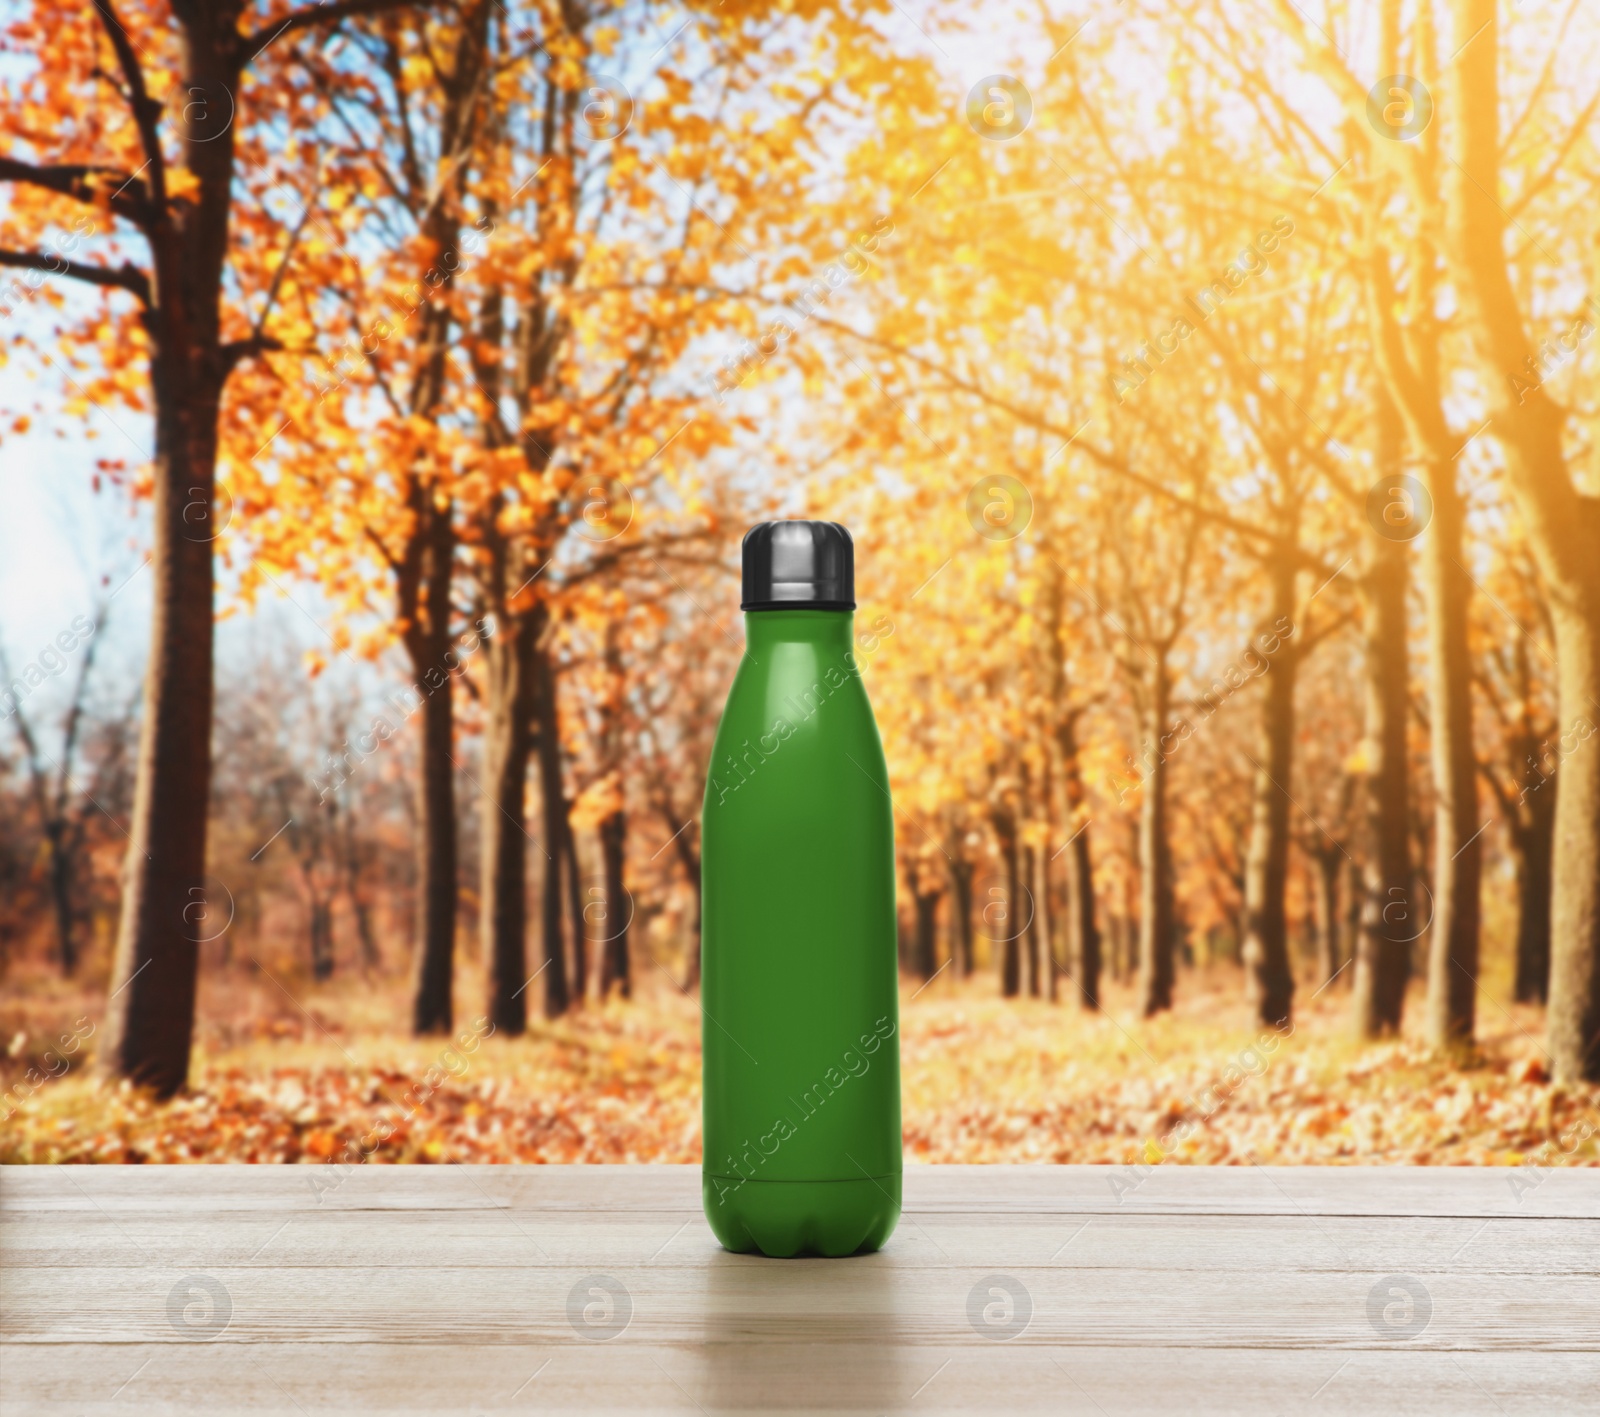 Image of Green thermos bottle on wooden table in autumn park